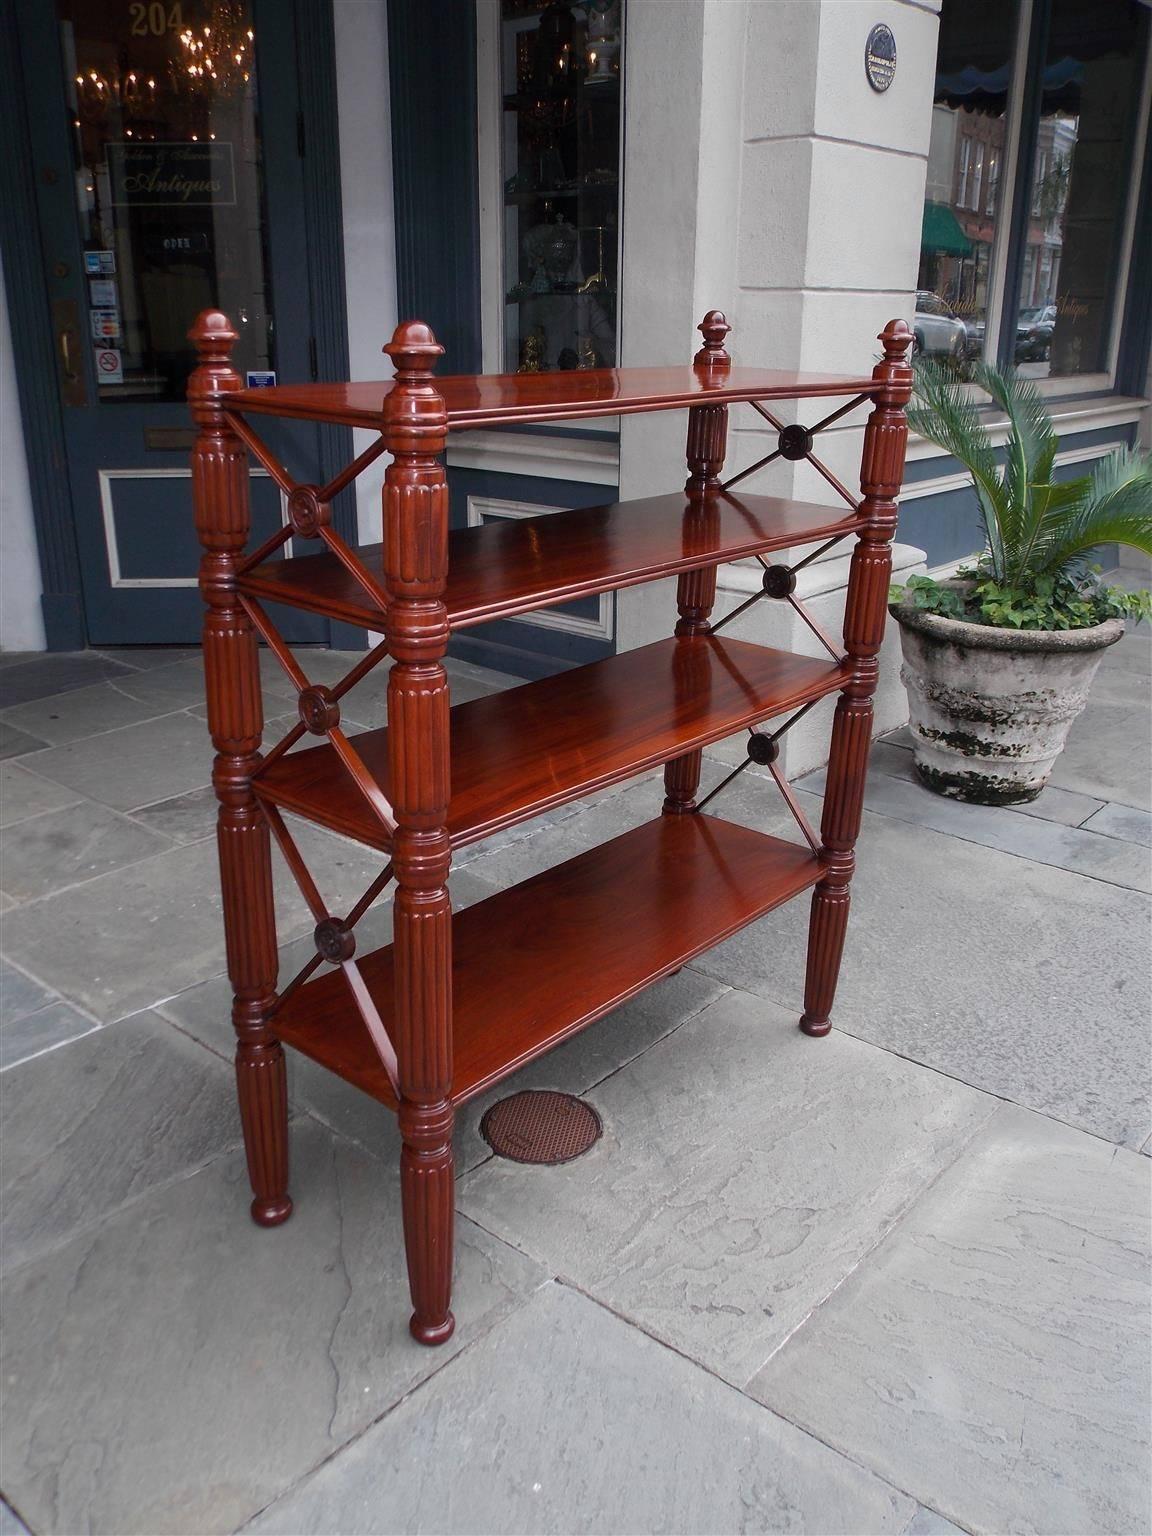 Caribbean regency mahogany four tier bookshelf with turned bulbous stylized acorn finials, reeded ringed side columns, cross hatching with centered floral medallions, and terminating on bun feet, Early 19th century.